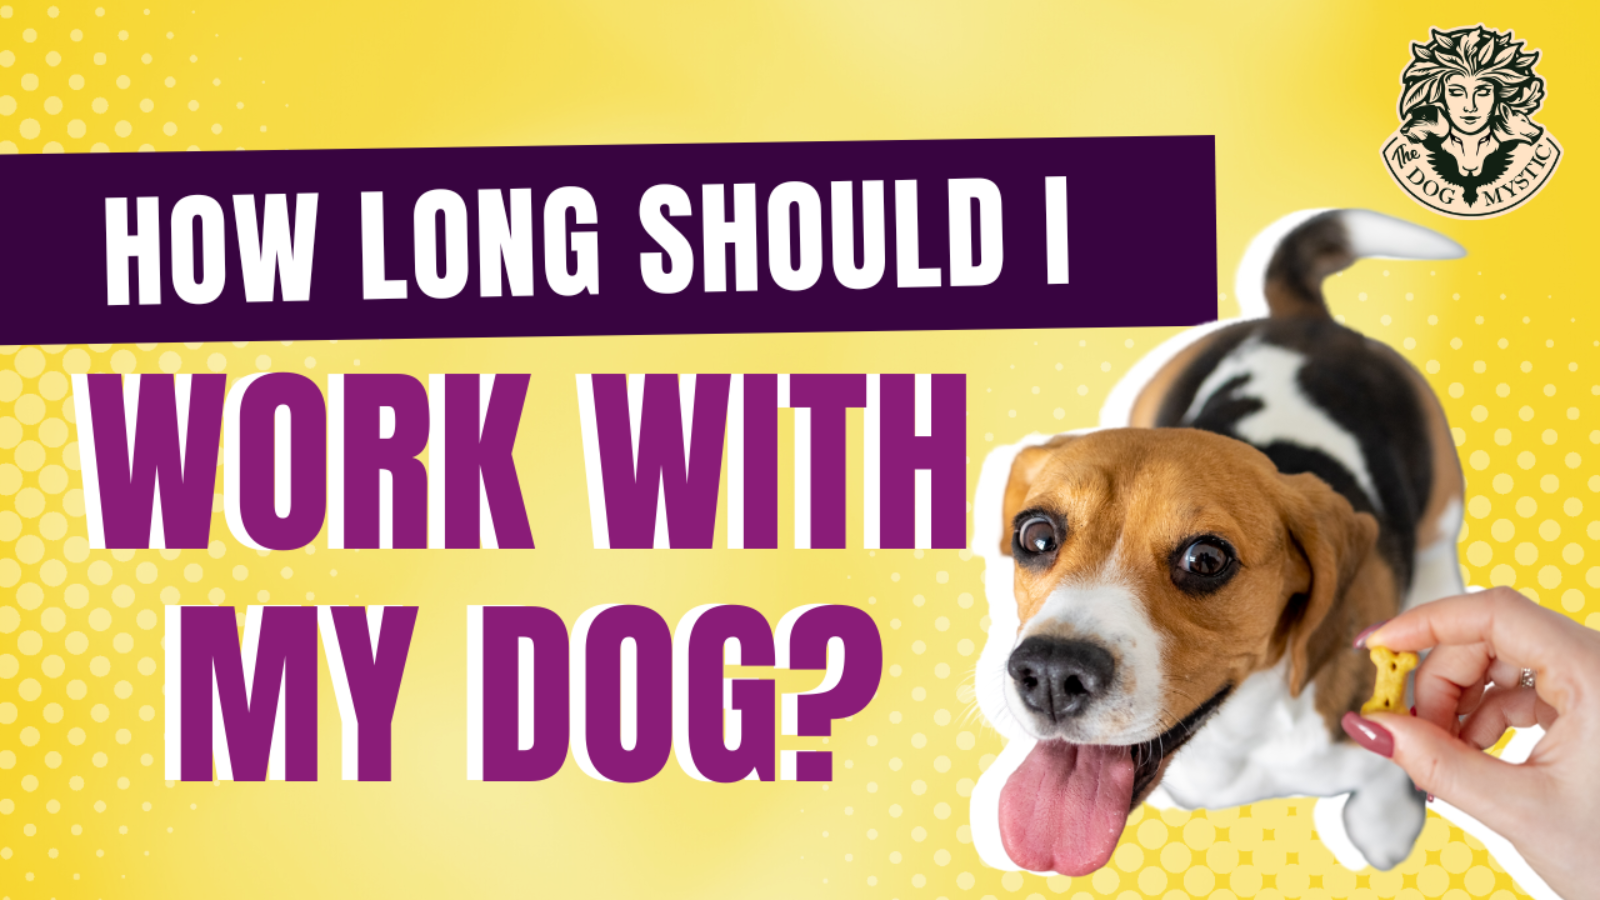 How Long Should I Work With My Dog